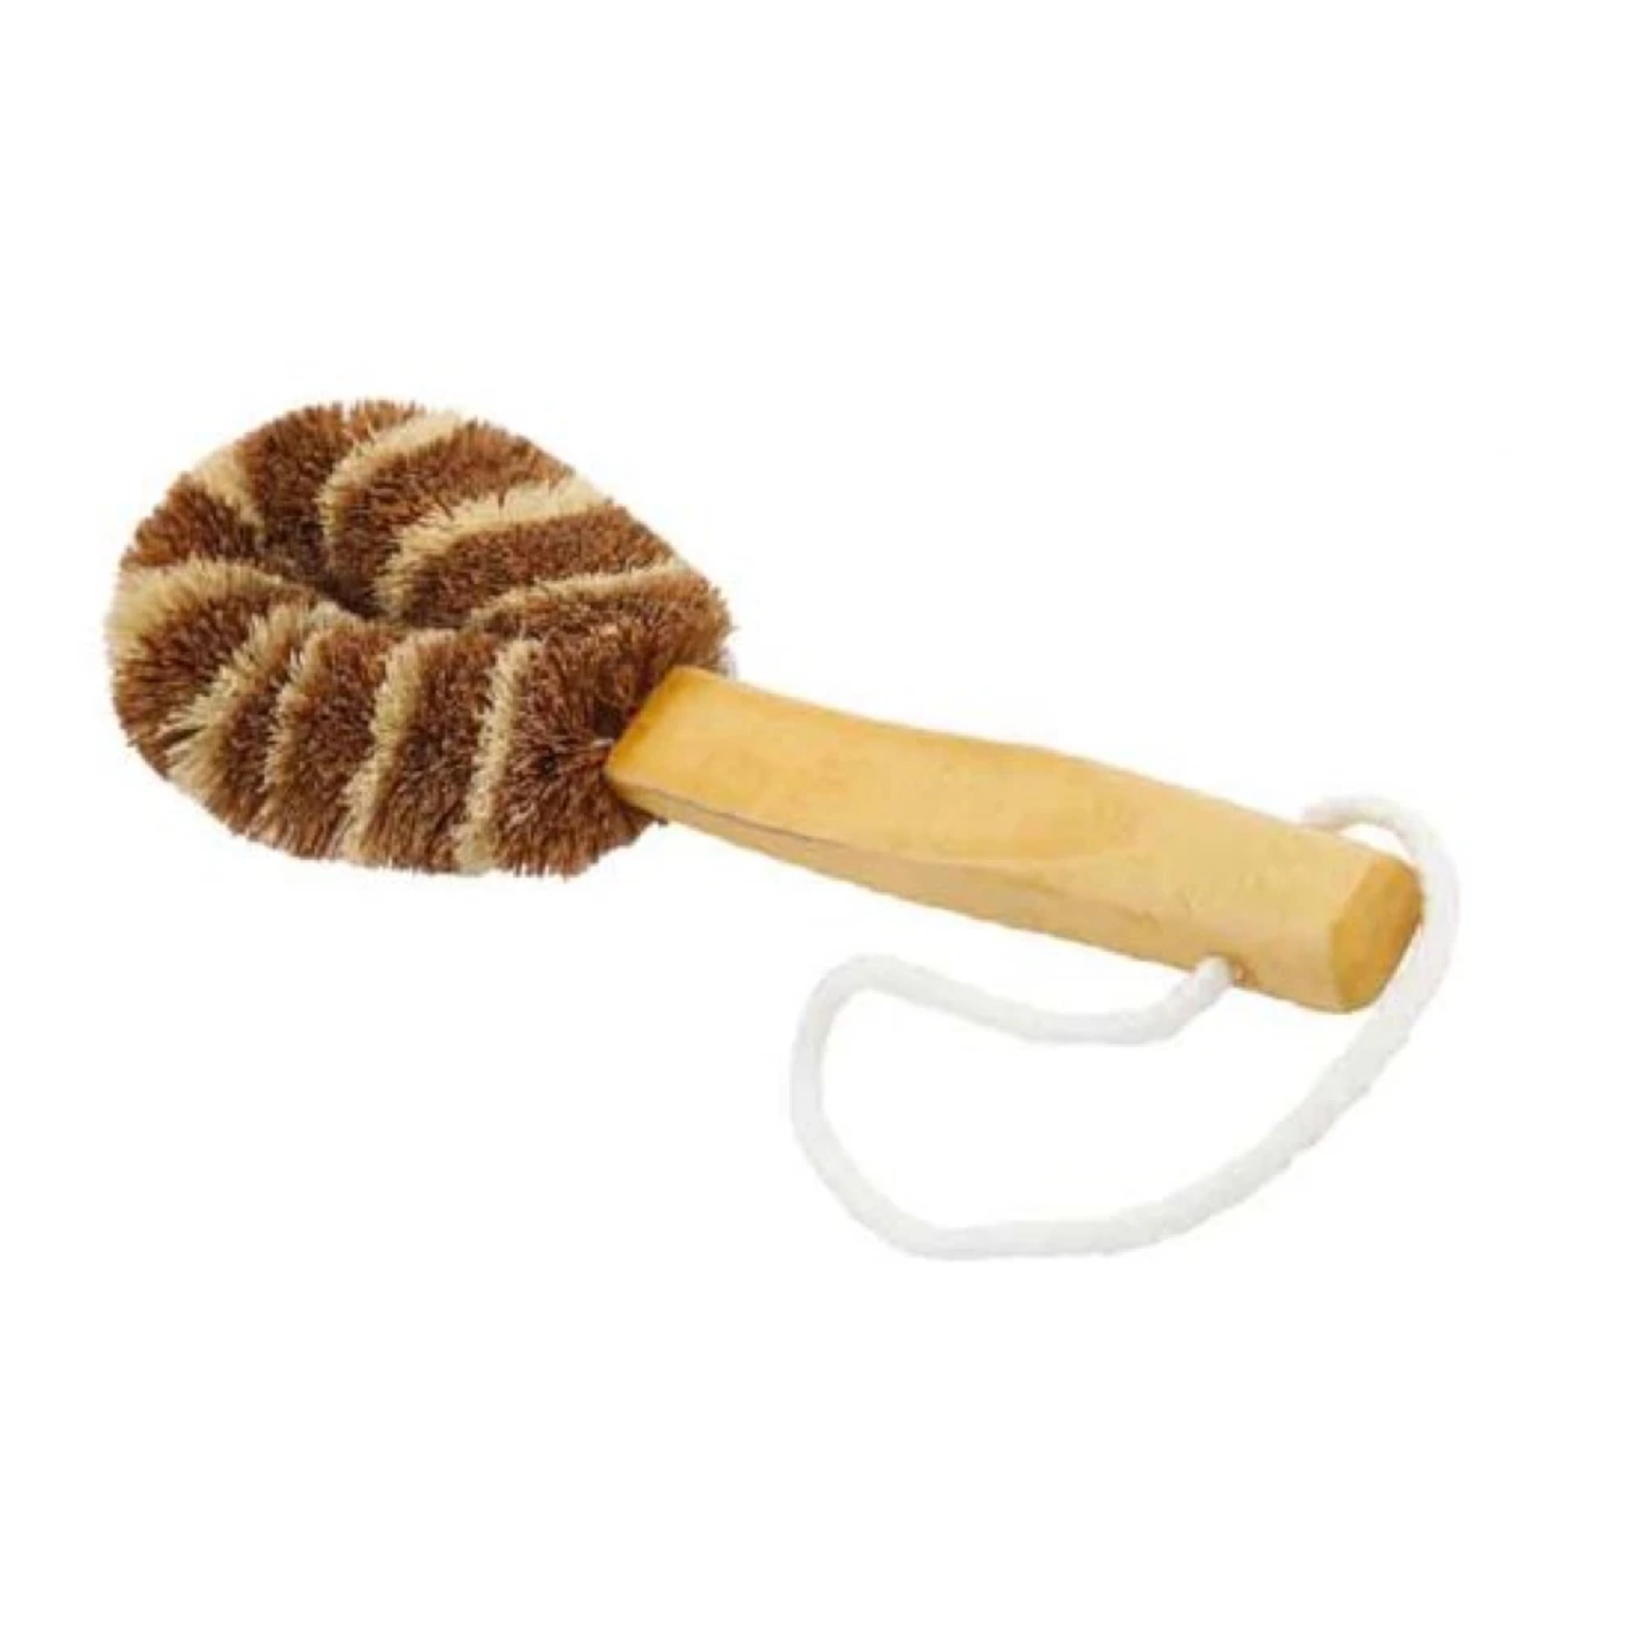 Eco Max Eco Max Shoes Cleaning Coconut Brush